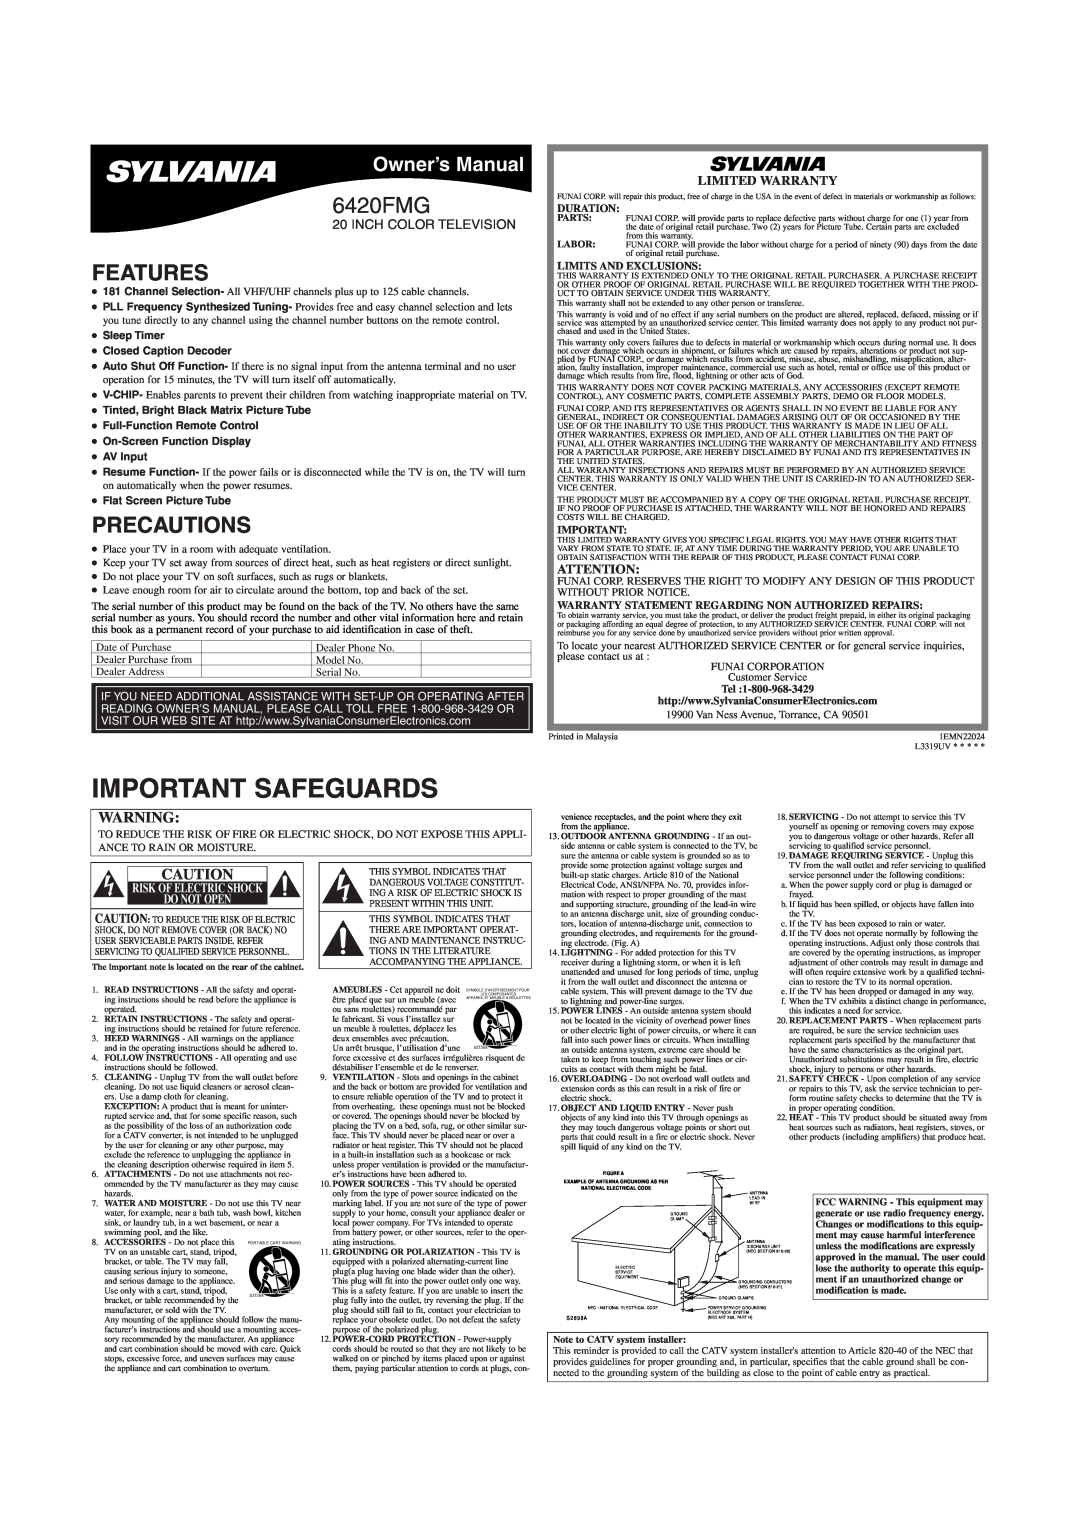 Sylvania 6420FMG owner manual Features, Precautions, Important Safeguards, Owner’s Manual, Inch Color Television 